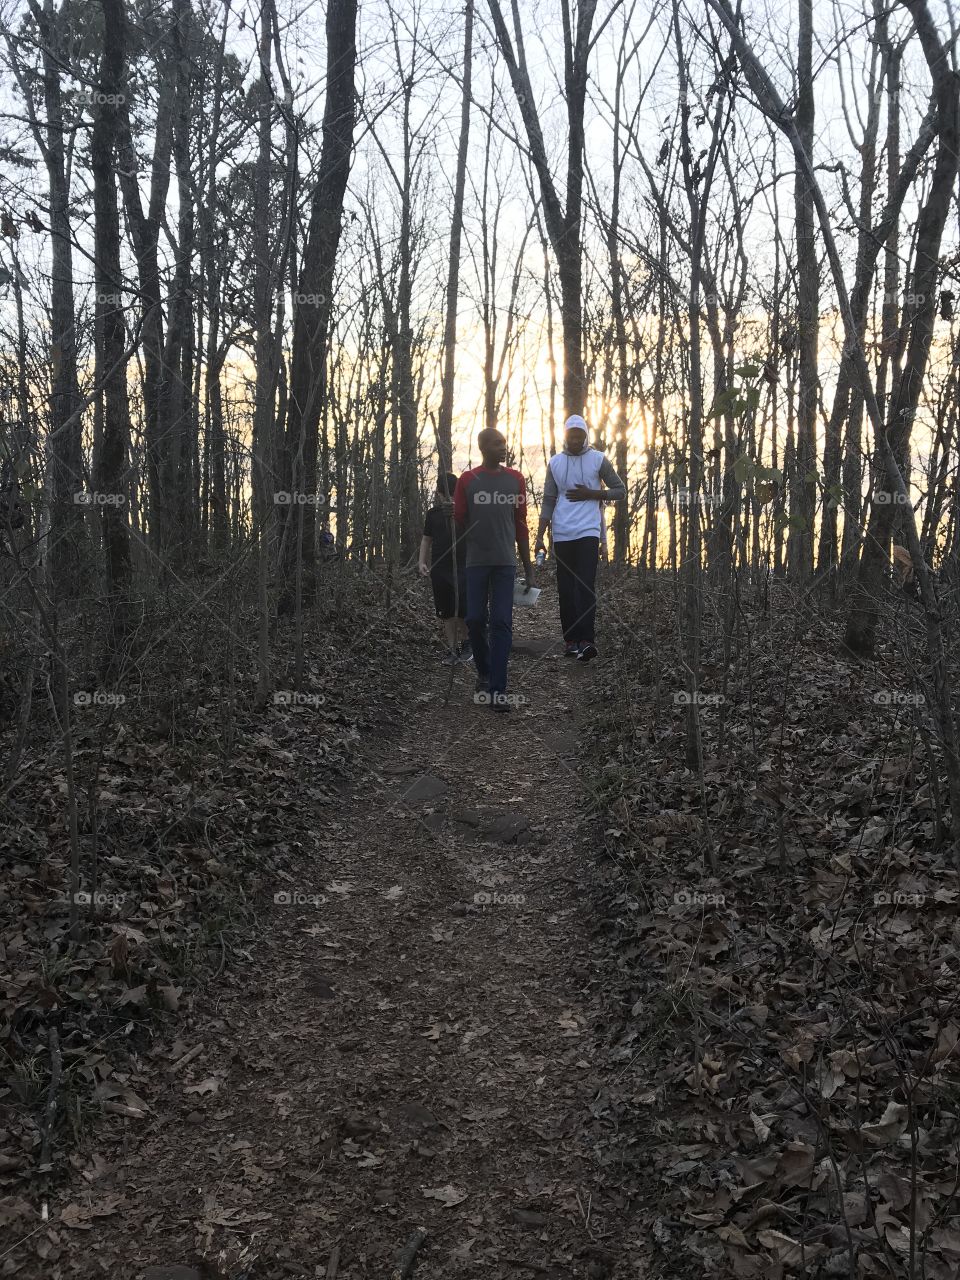 Ruffner Mountain Nature Center and trails